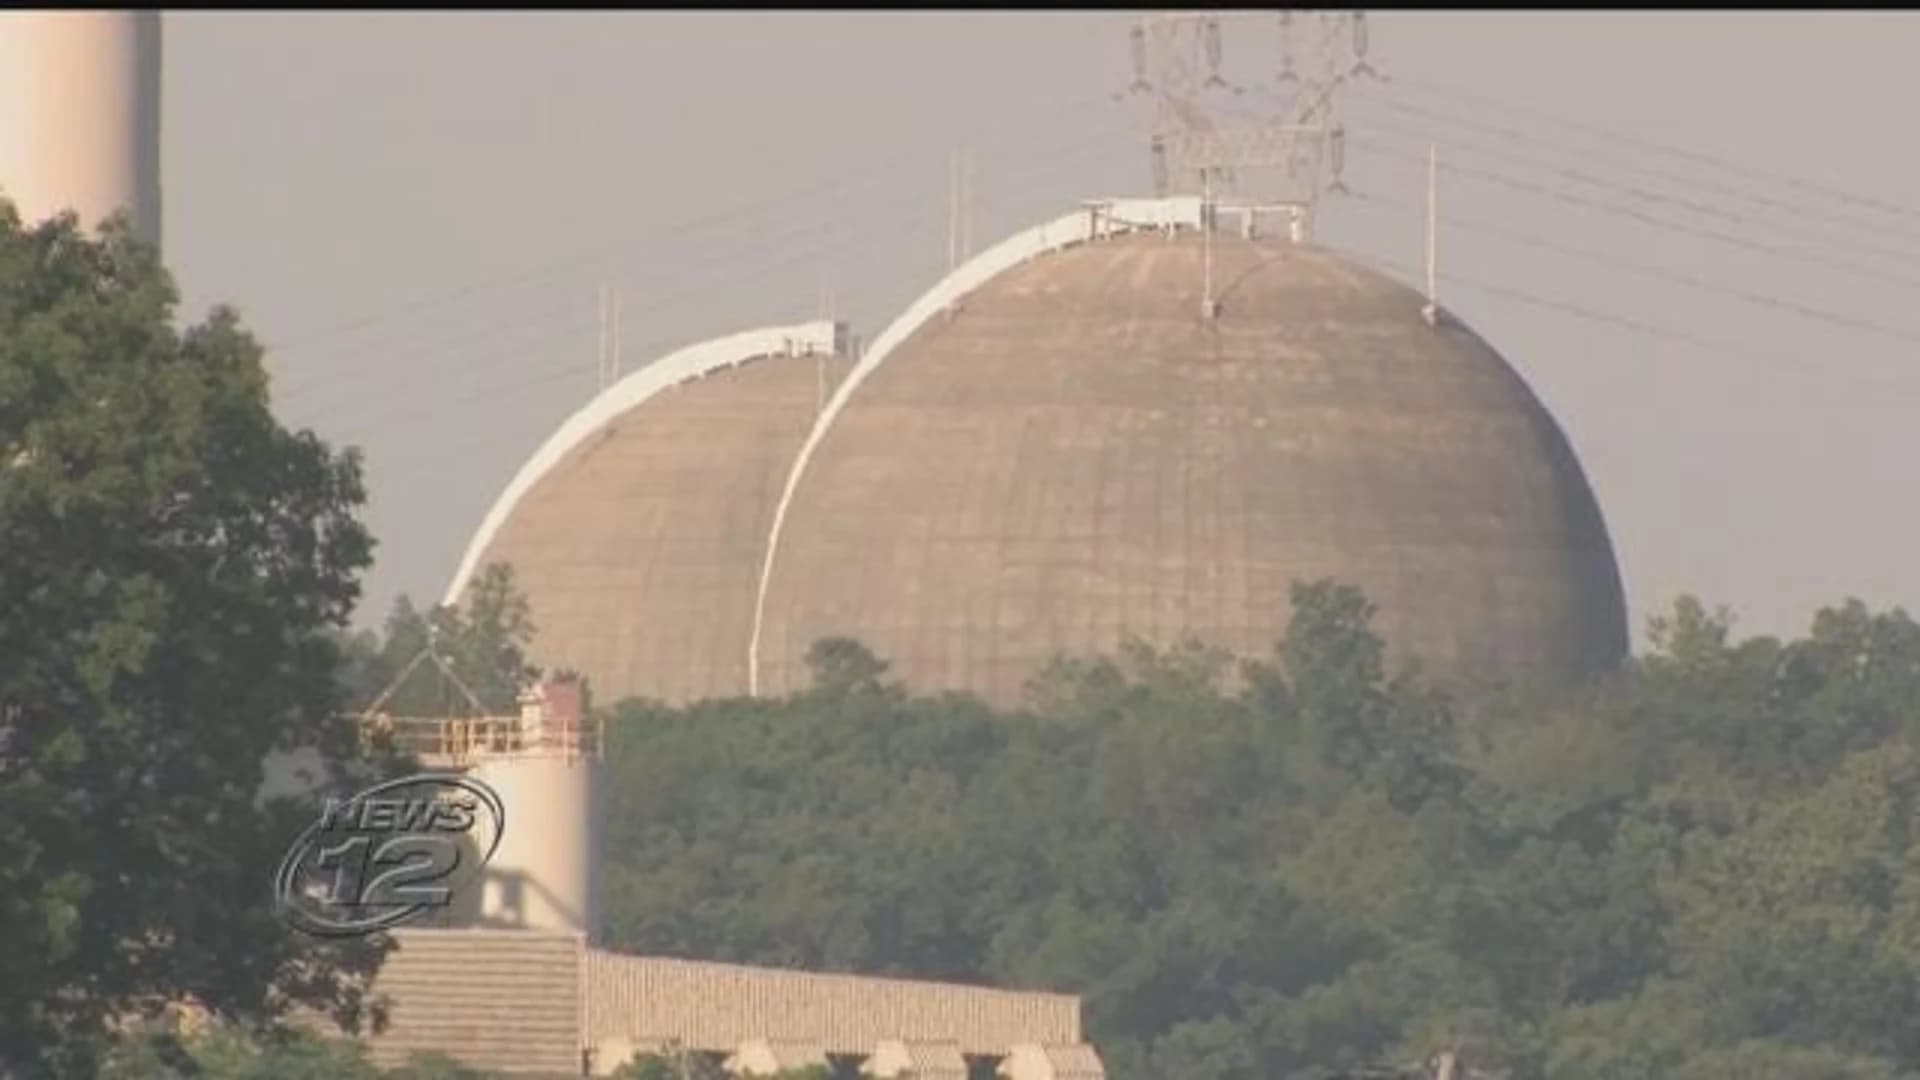 Residents call for watchdog board to monitor Indian Point closure